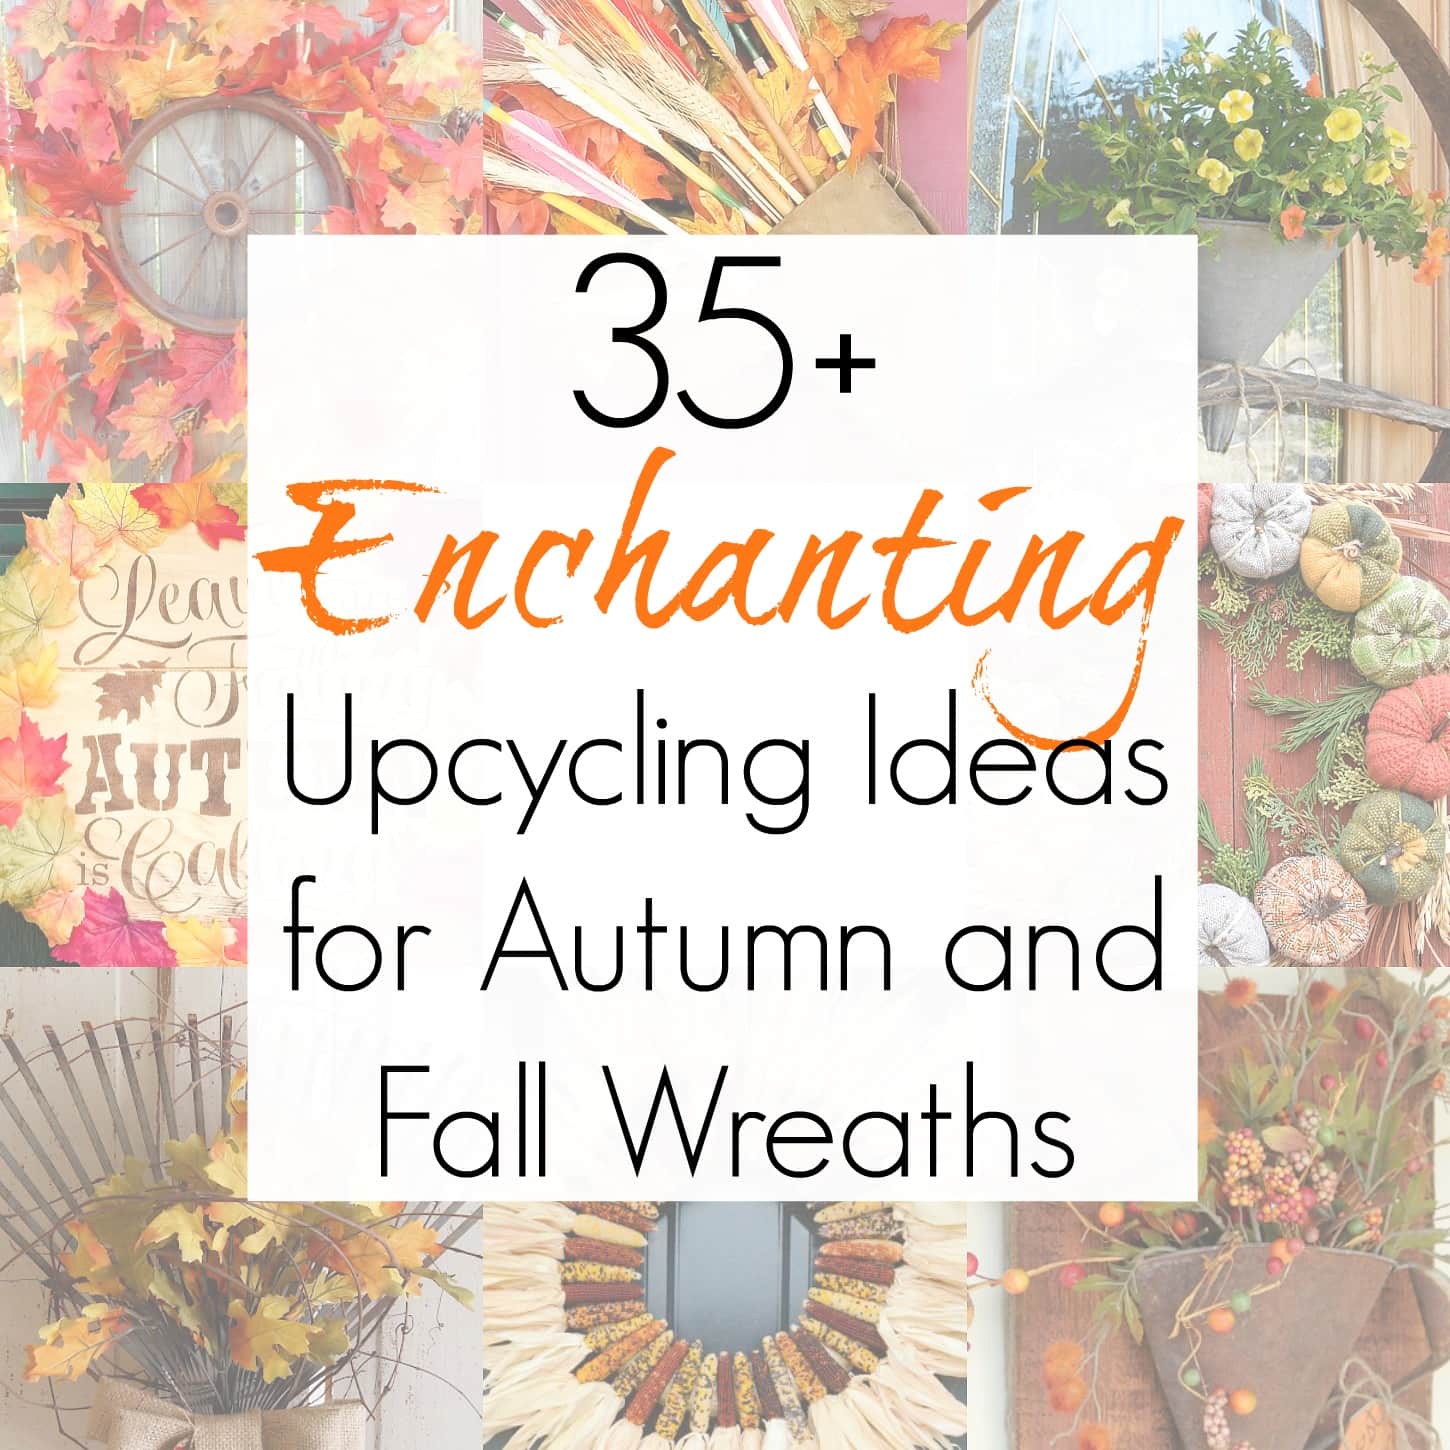 35+ Upcycling Projects for Fall Wreath Ideas